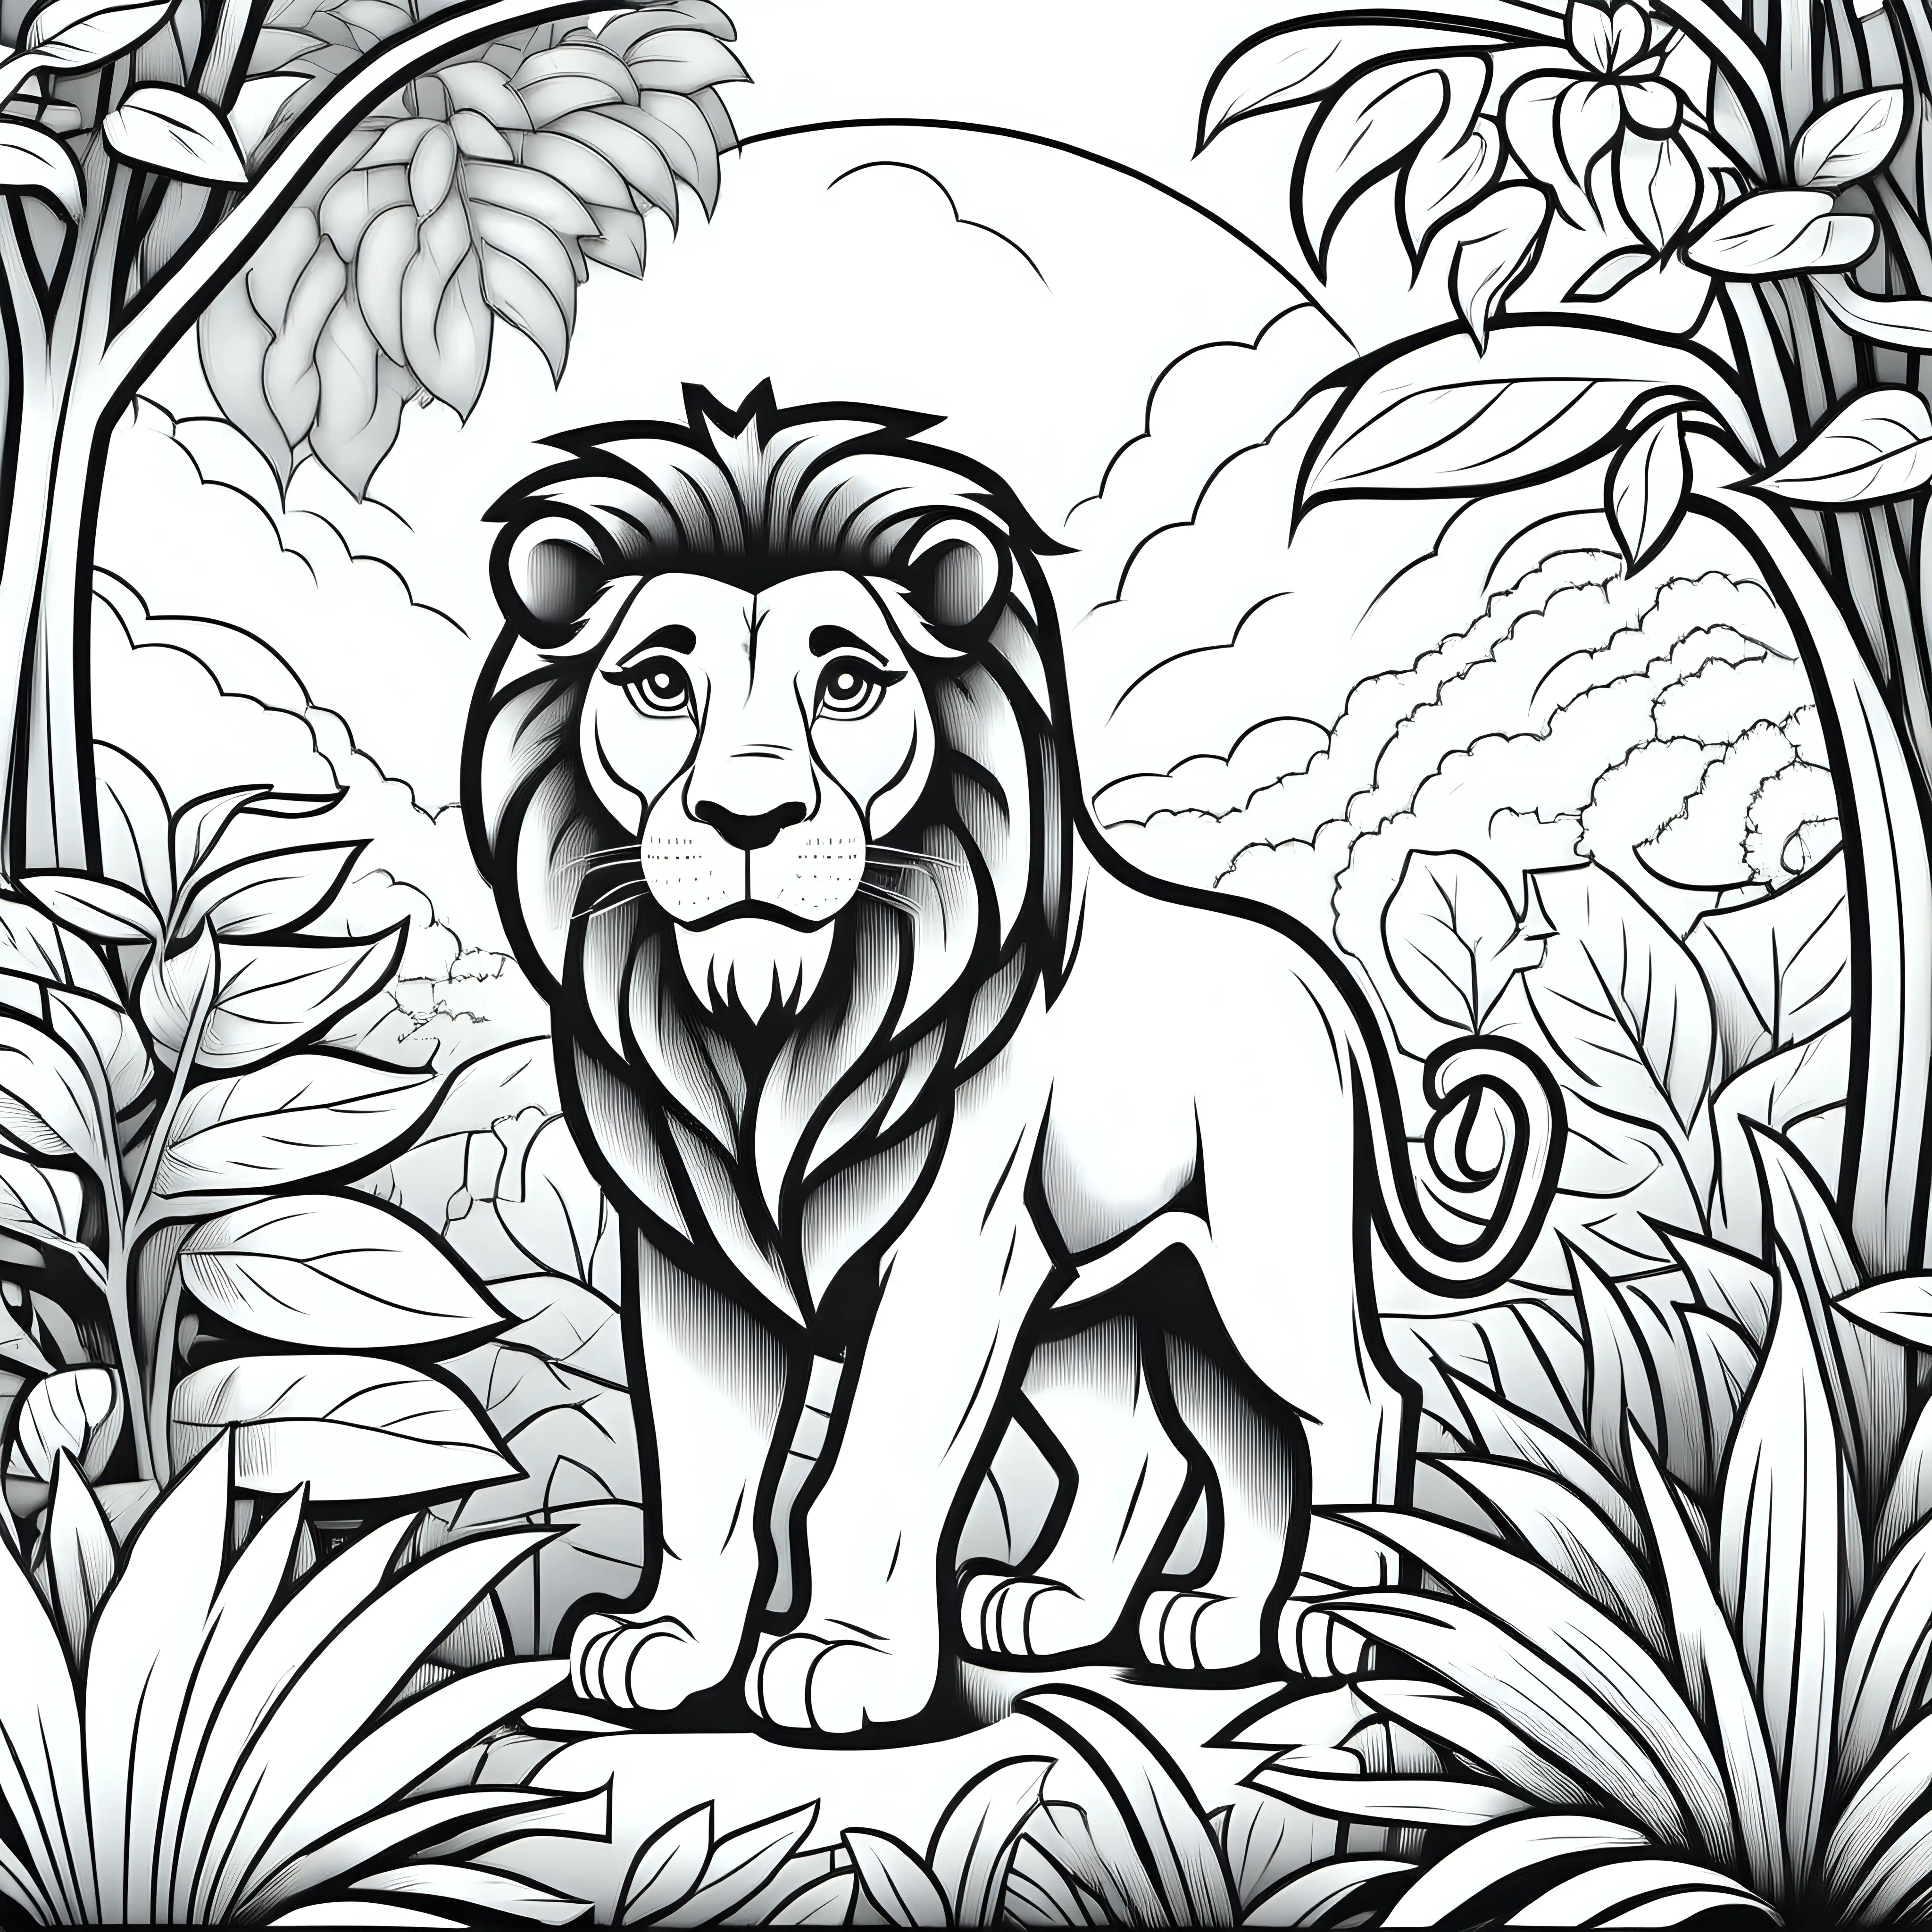 Coloring page for kids, Lion in Garden of Eden, clean line art